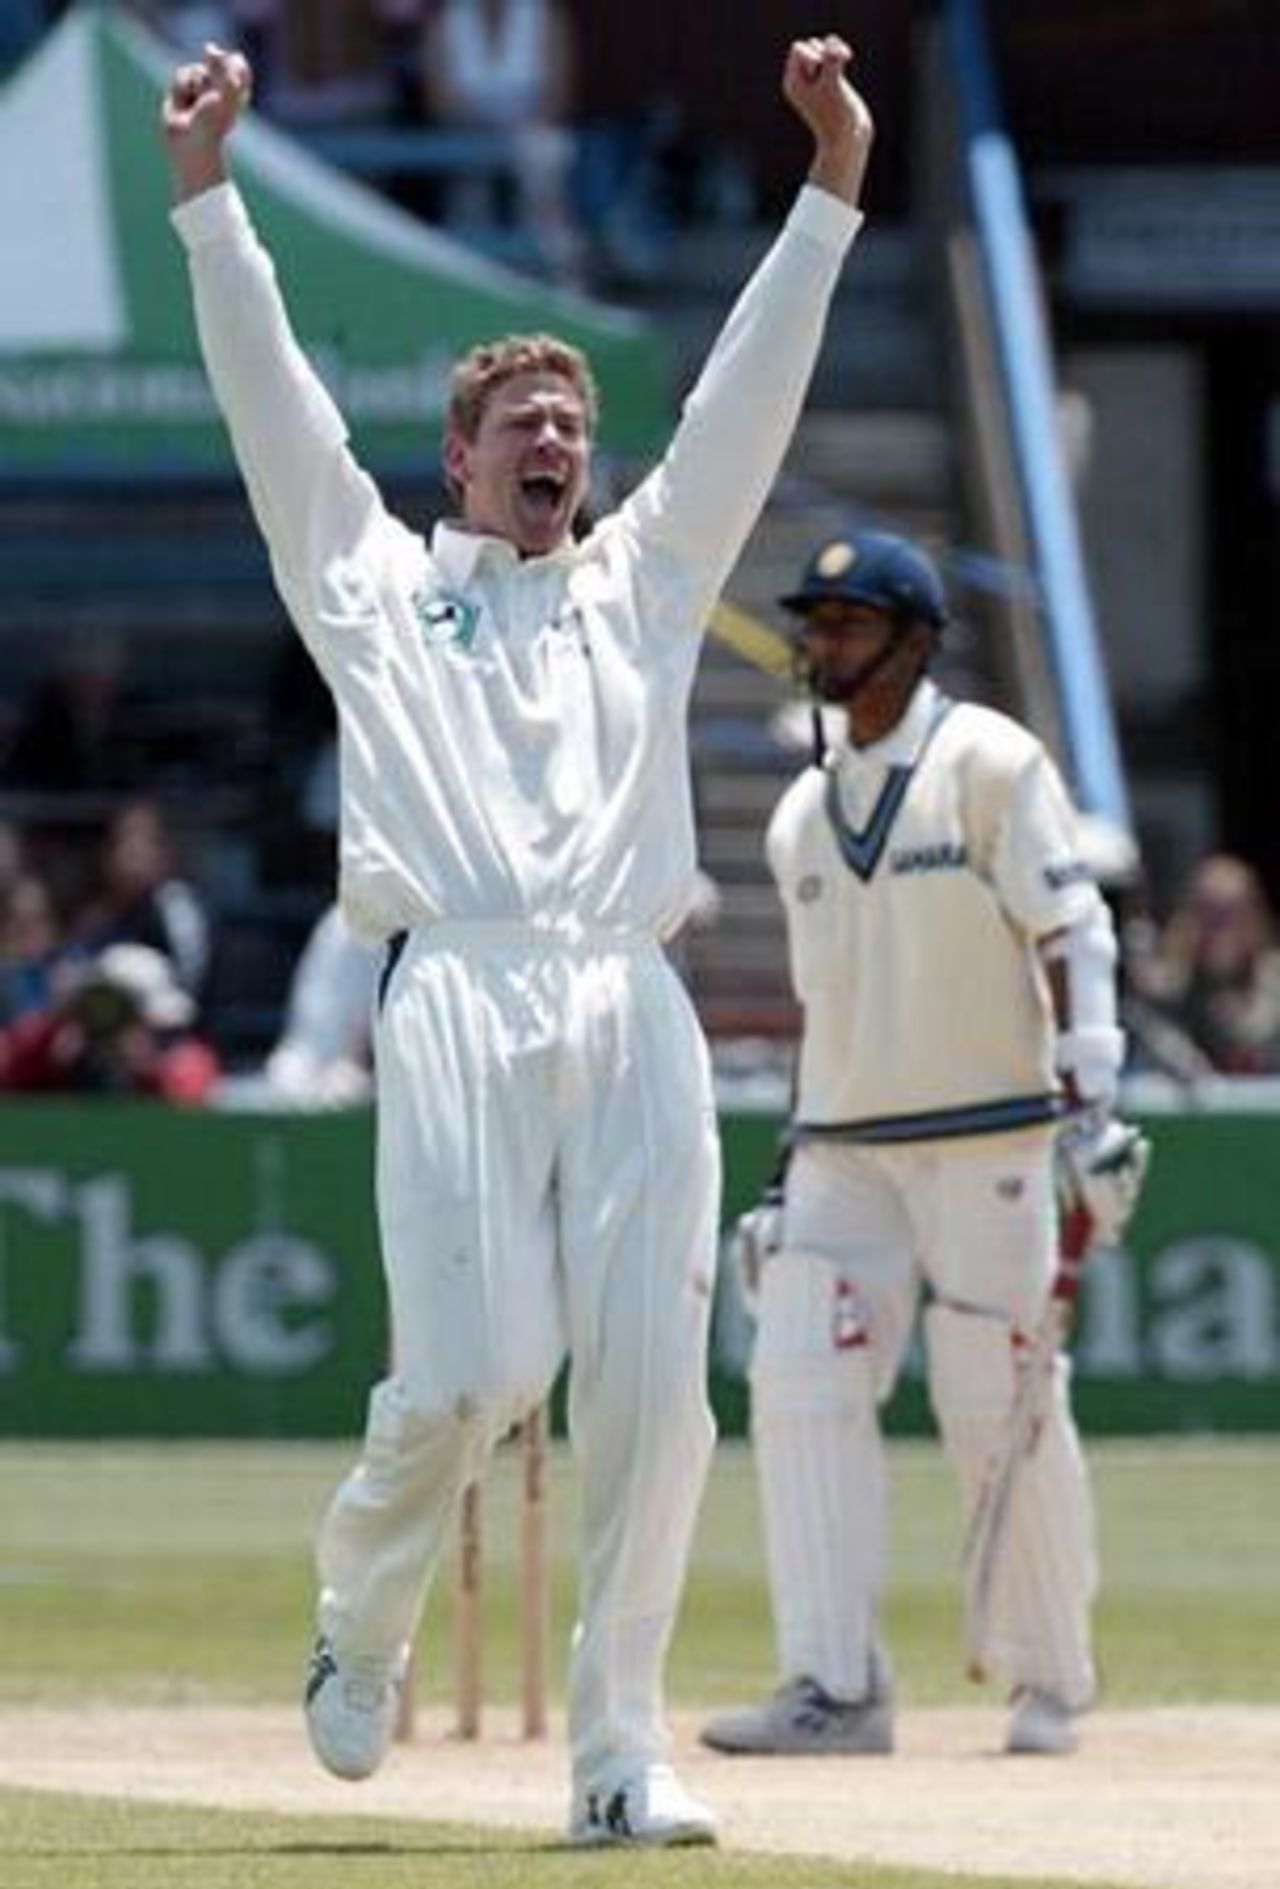 New Zealand bowler Jacob Oram successfully appeals for lbw to dismiss Indian batsman Sanjay Bangar in his second innings for 12. 1st Test: New Zealand v India at Basin Reserve, Wellington, 12-16 December 2002 (14 December 2002).